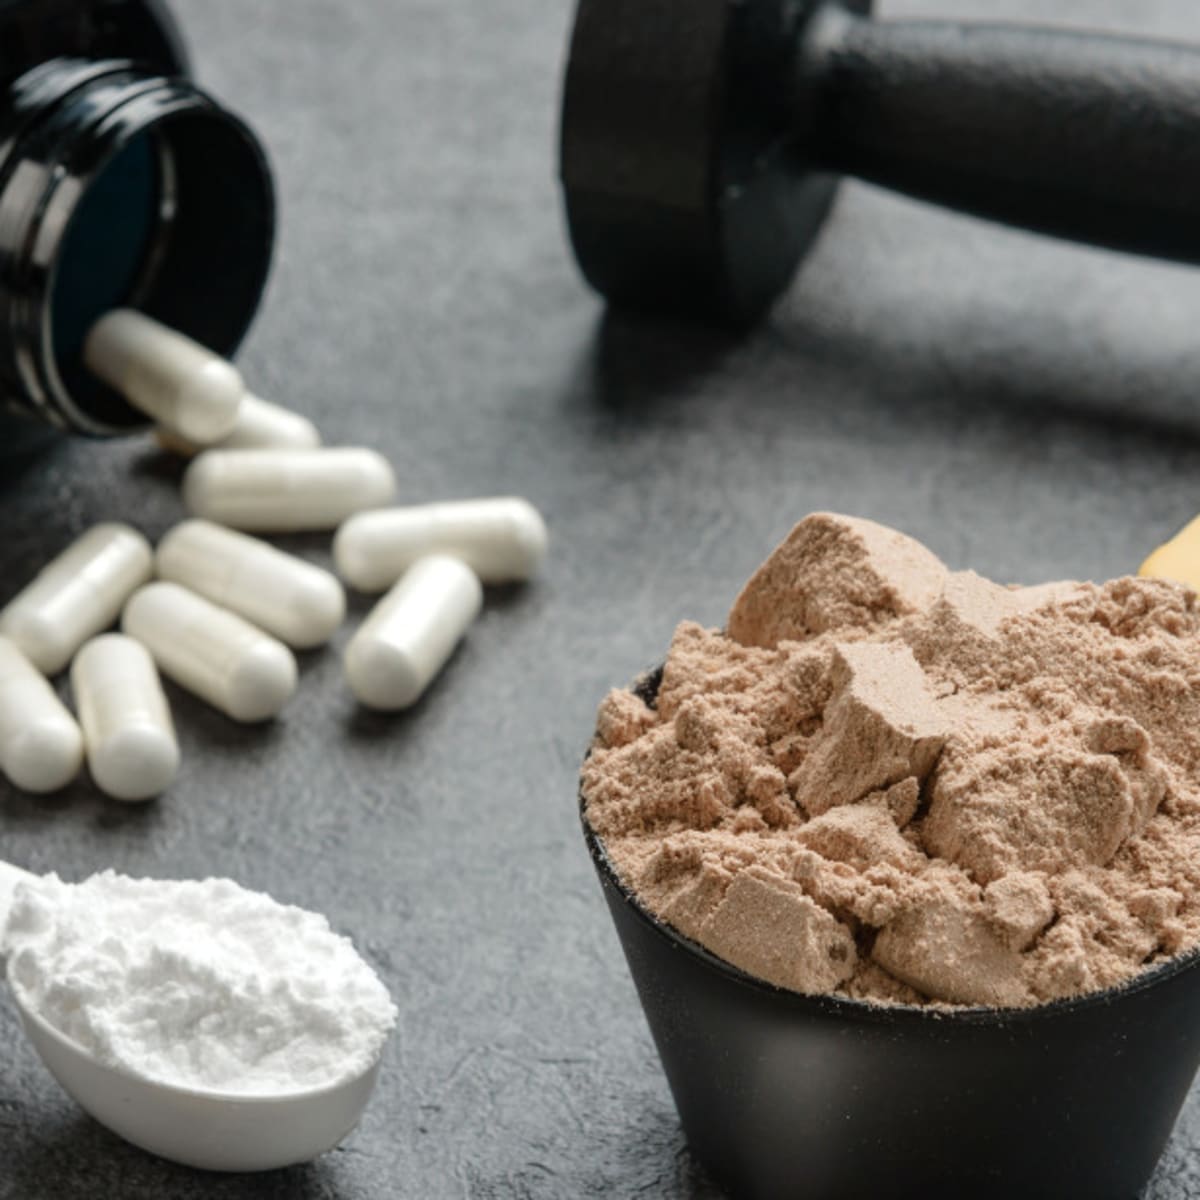 Bulk Supplements Review With Protein And Creatine (for 2023)